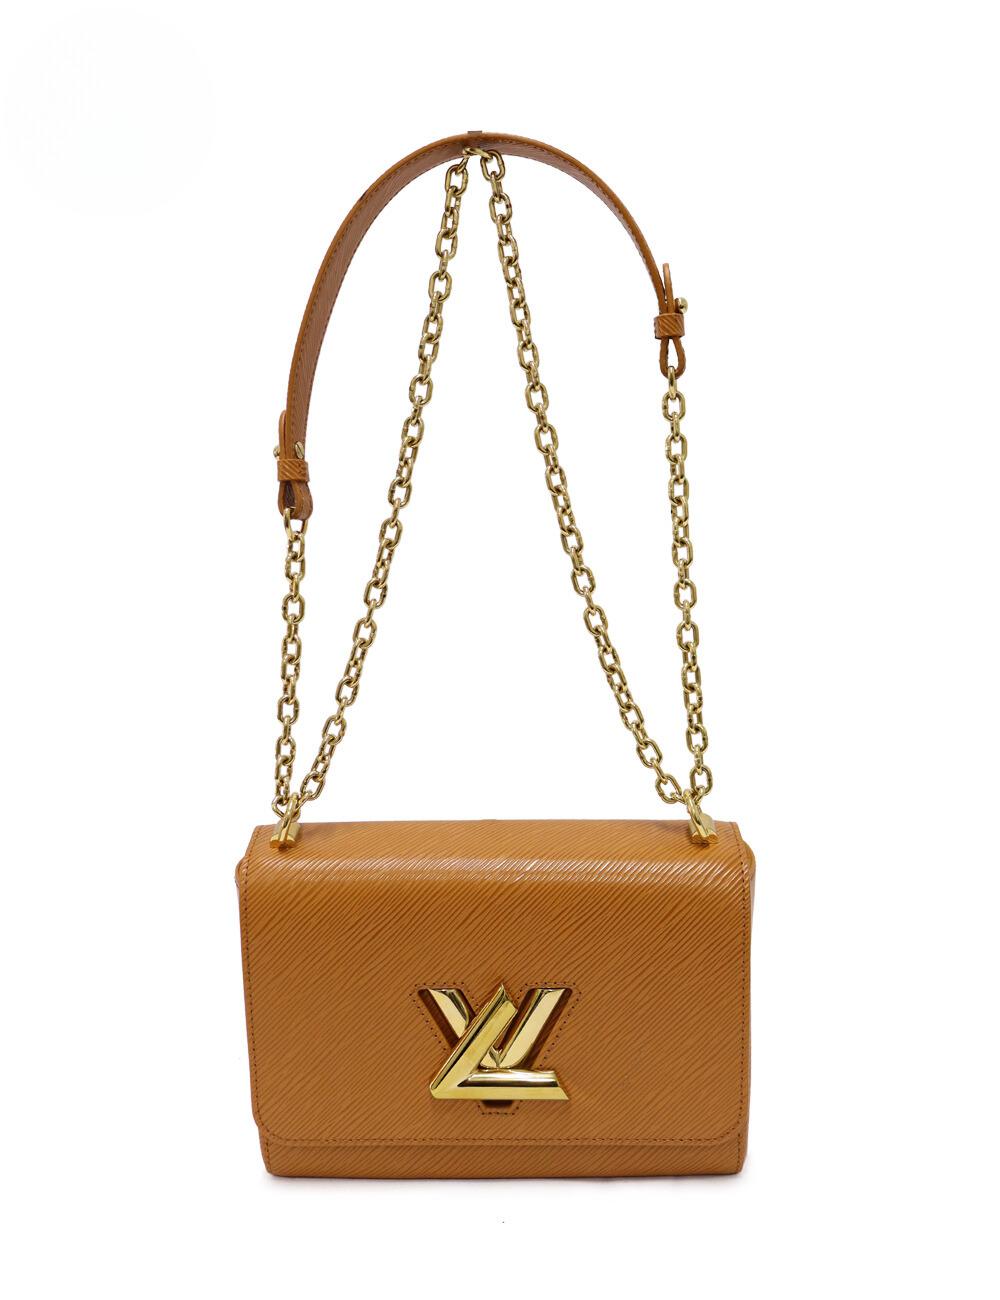 Louis Vuitton Twist Lock MM Epi Leather Chain Bag, Features Two Interior flat pockets one with removable mirror.

Material: Leather
Hardware: Gold
Height: 23cm
Width: 17cm
Depth: 9cm
Chain Drop: 30cm
Overall condition: Excellent
Interior condition: